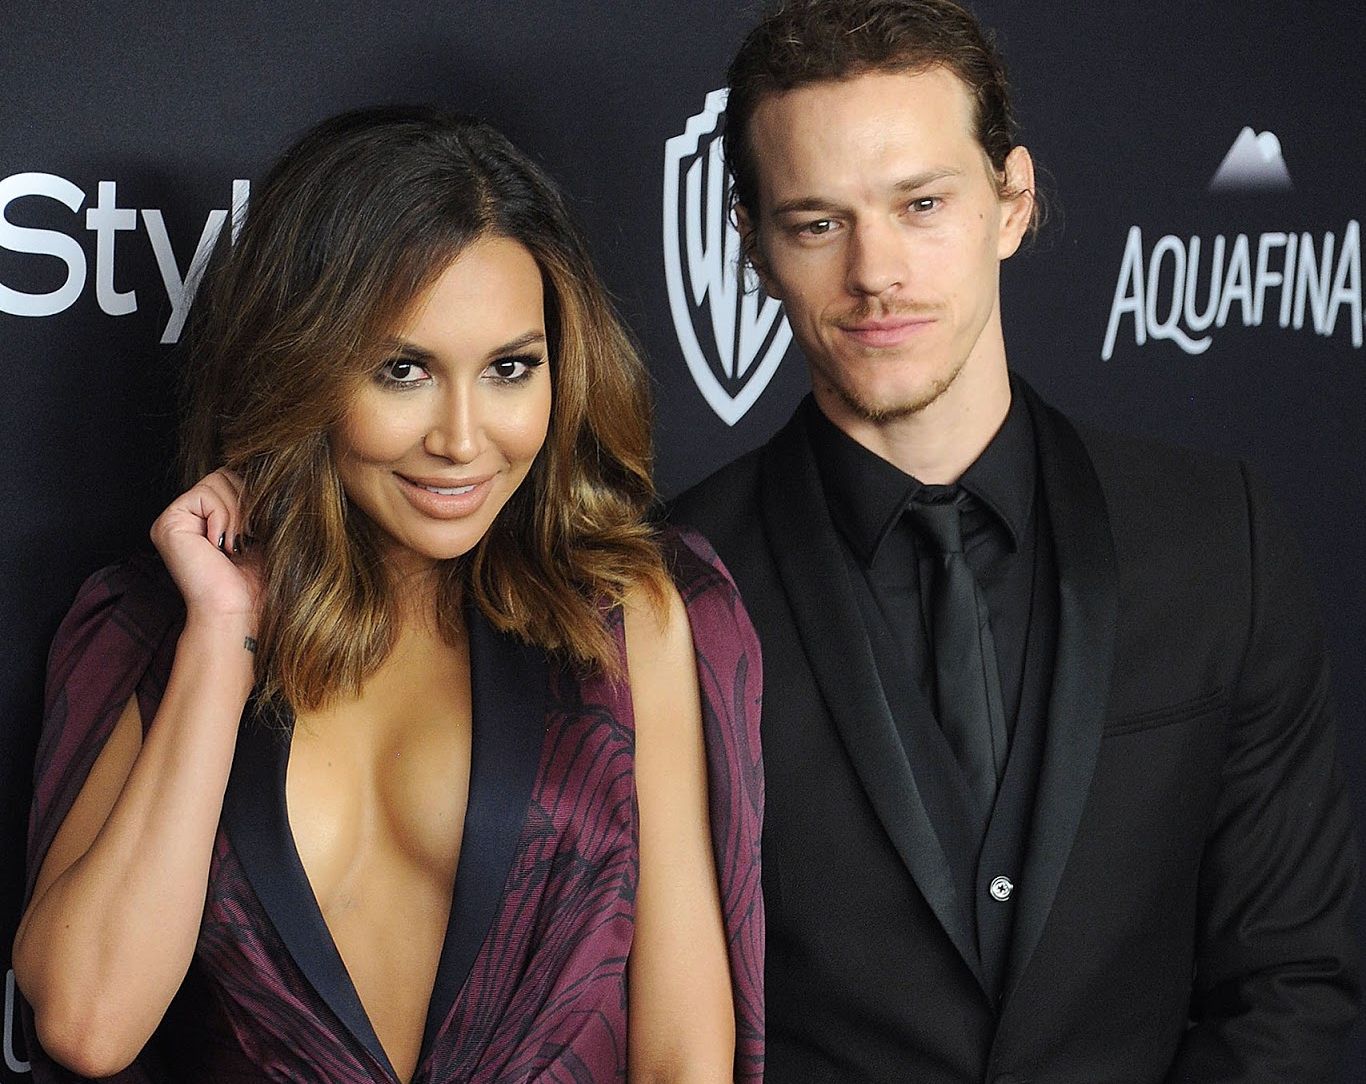 Big search for ‘Glee’ actress Naya Rivera, feared dead